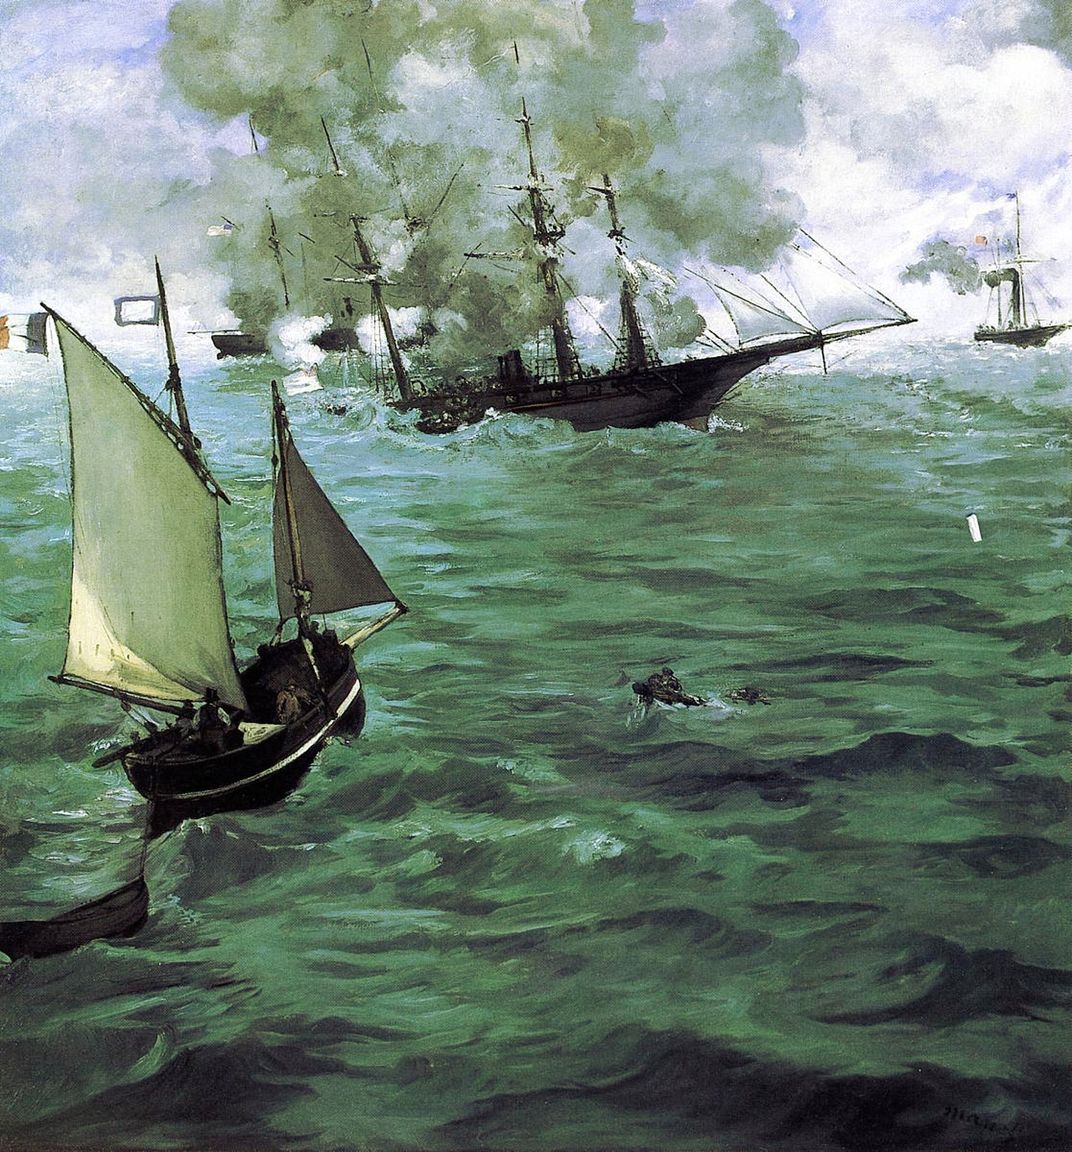 Édouard Manet, The Battle of the Kearsarge and the Alabama, 1864